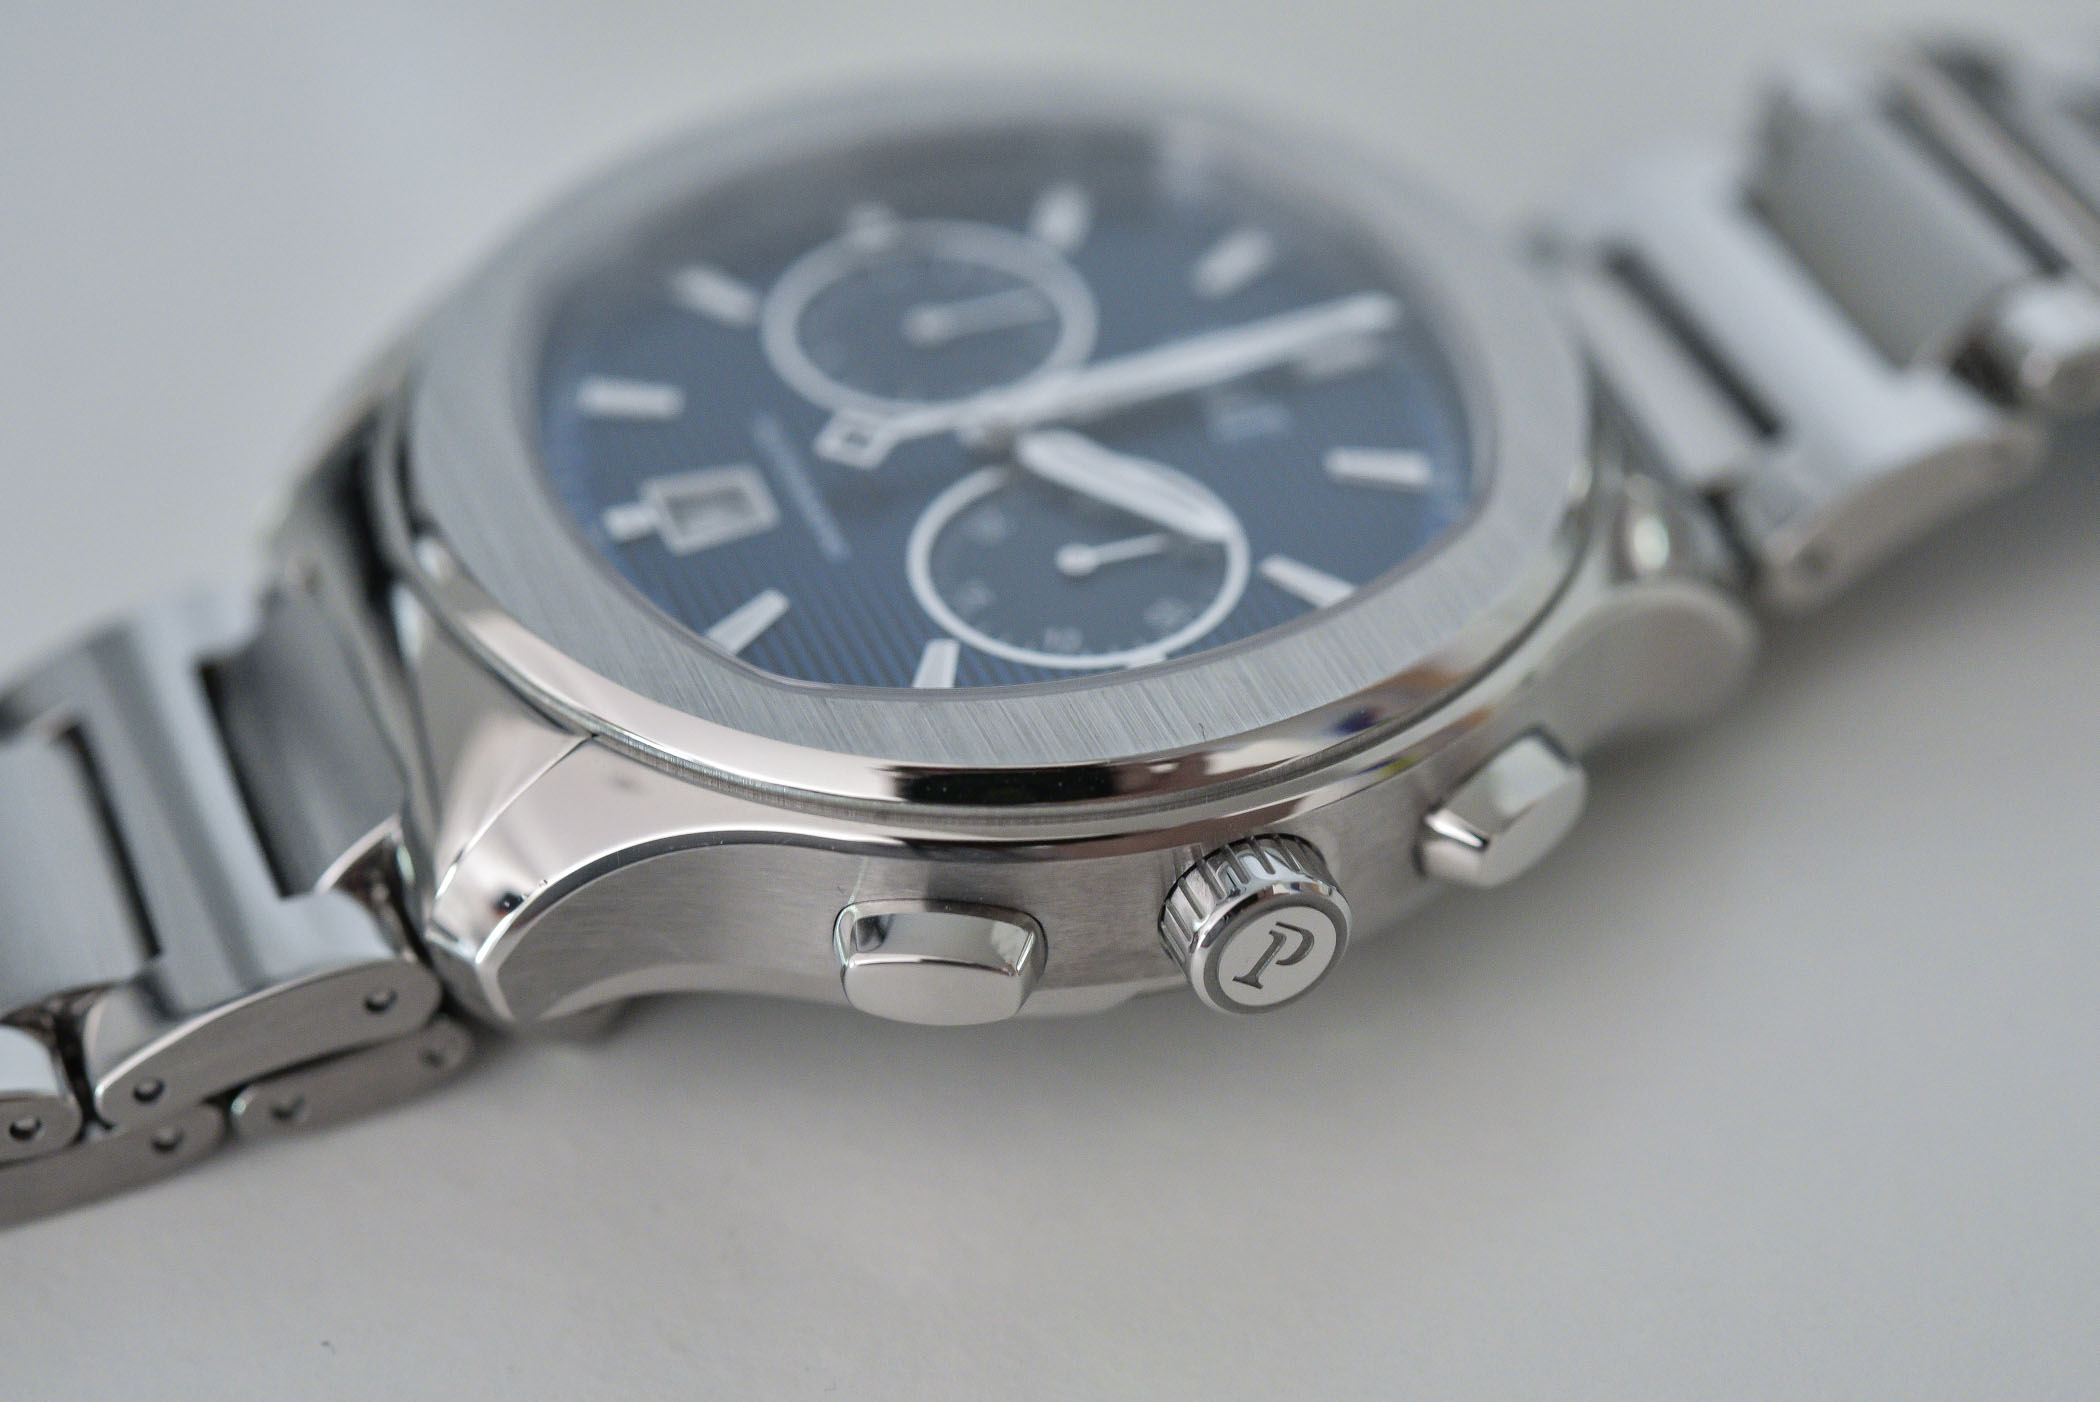 Piaget Polo S Chronograph - Review